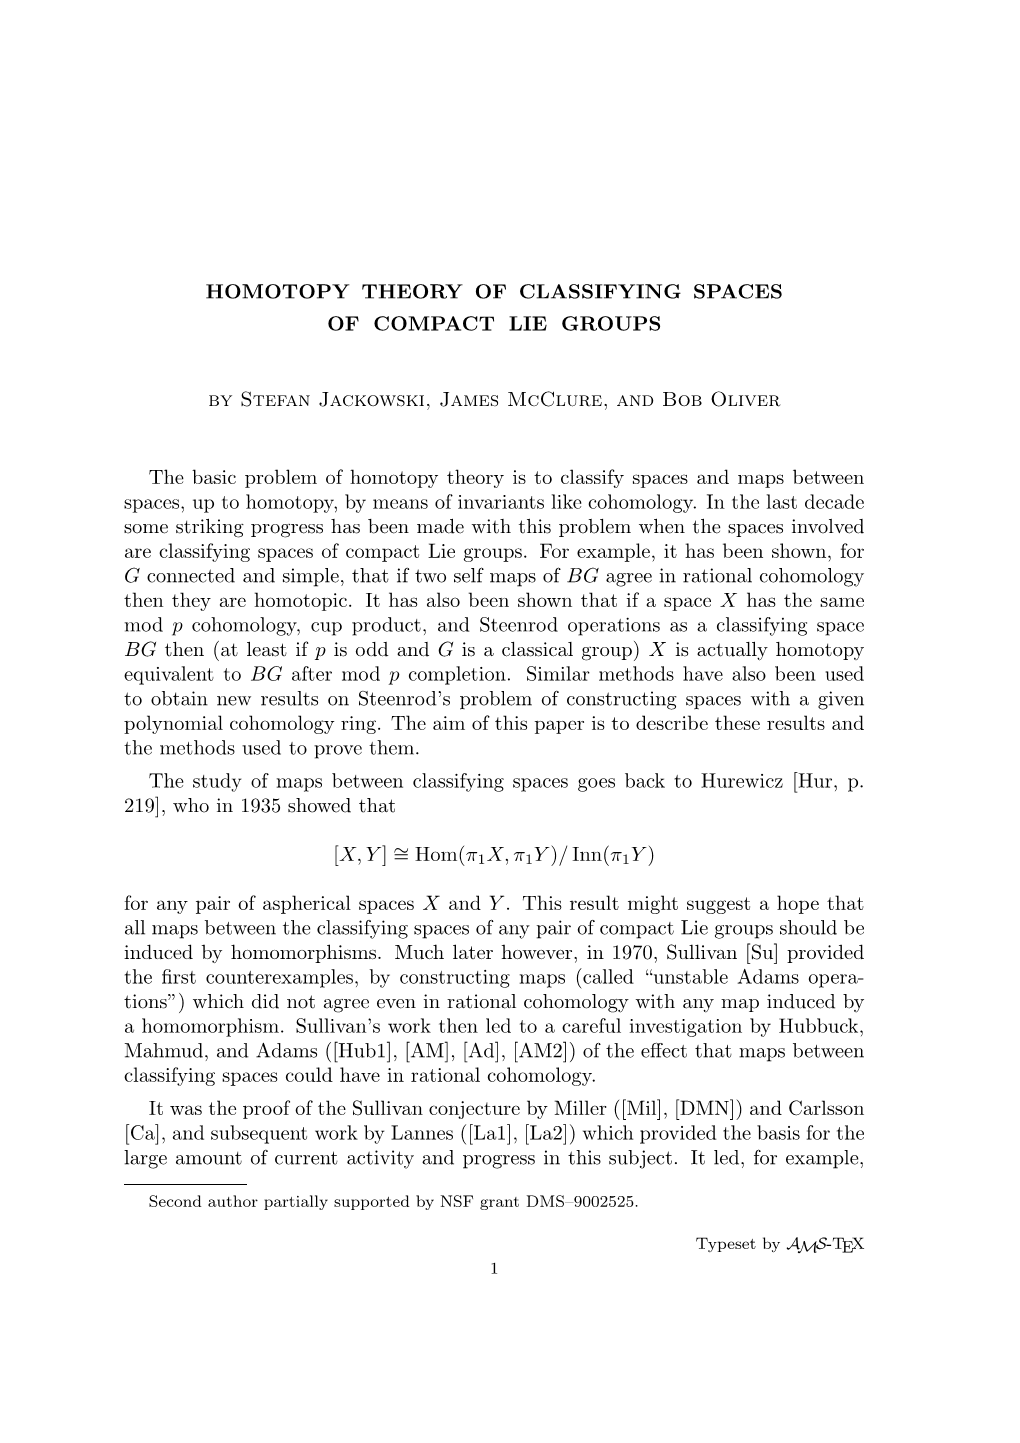 Homotopy Theory of Classifying Spaces of Compact Lie Groups